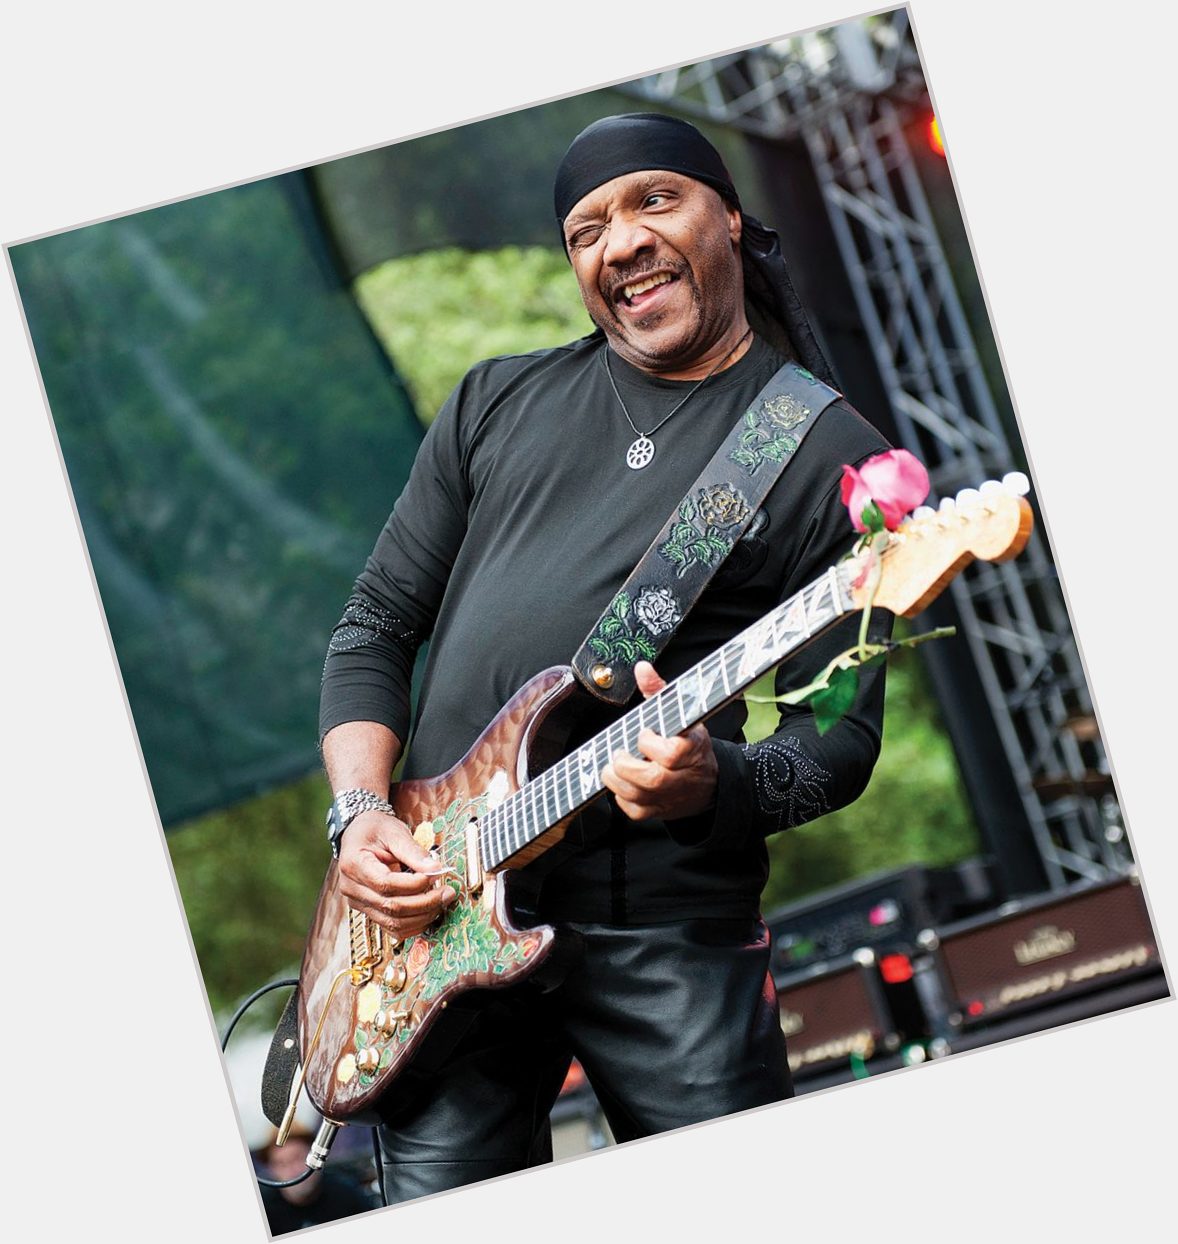 Please join me here at in wishing the one and only Ernie Isley a very Happy 69th Birthday today  